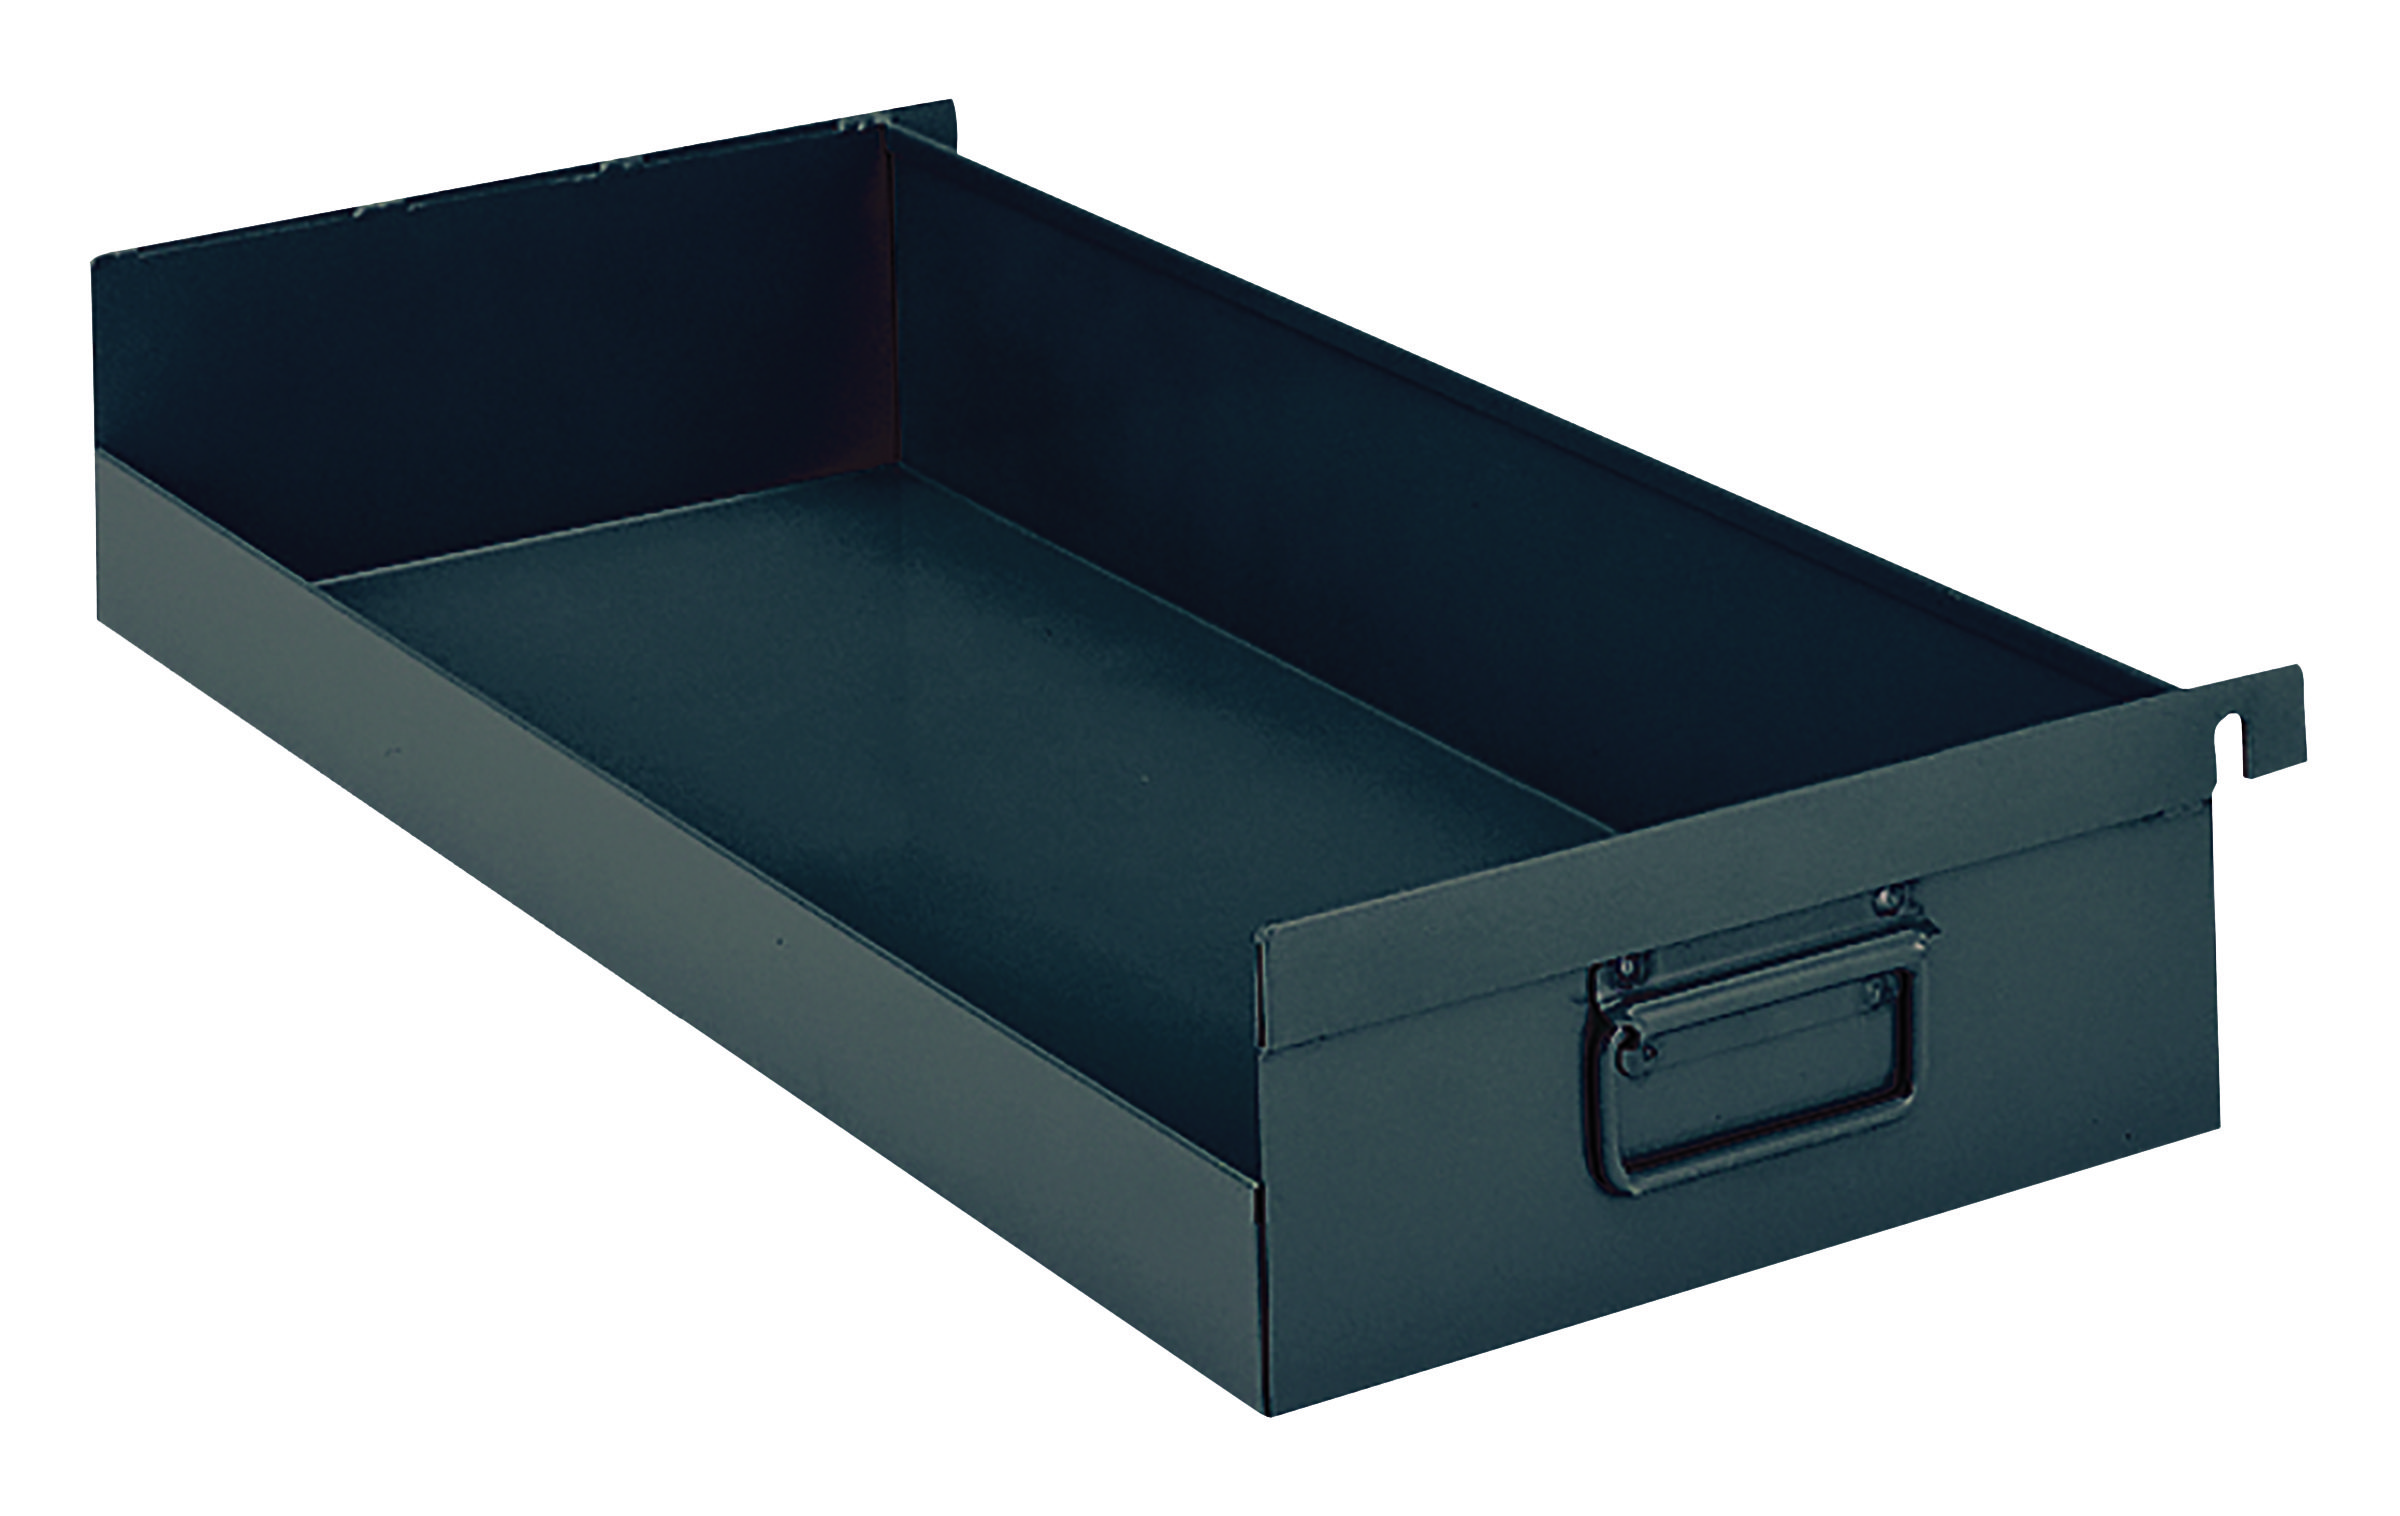 Trays for Heavy Duty A-Frame Cart - Valley Craft